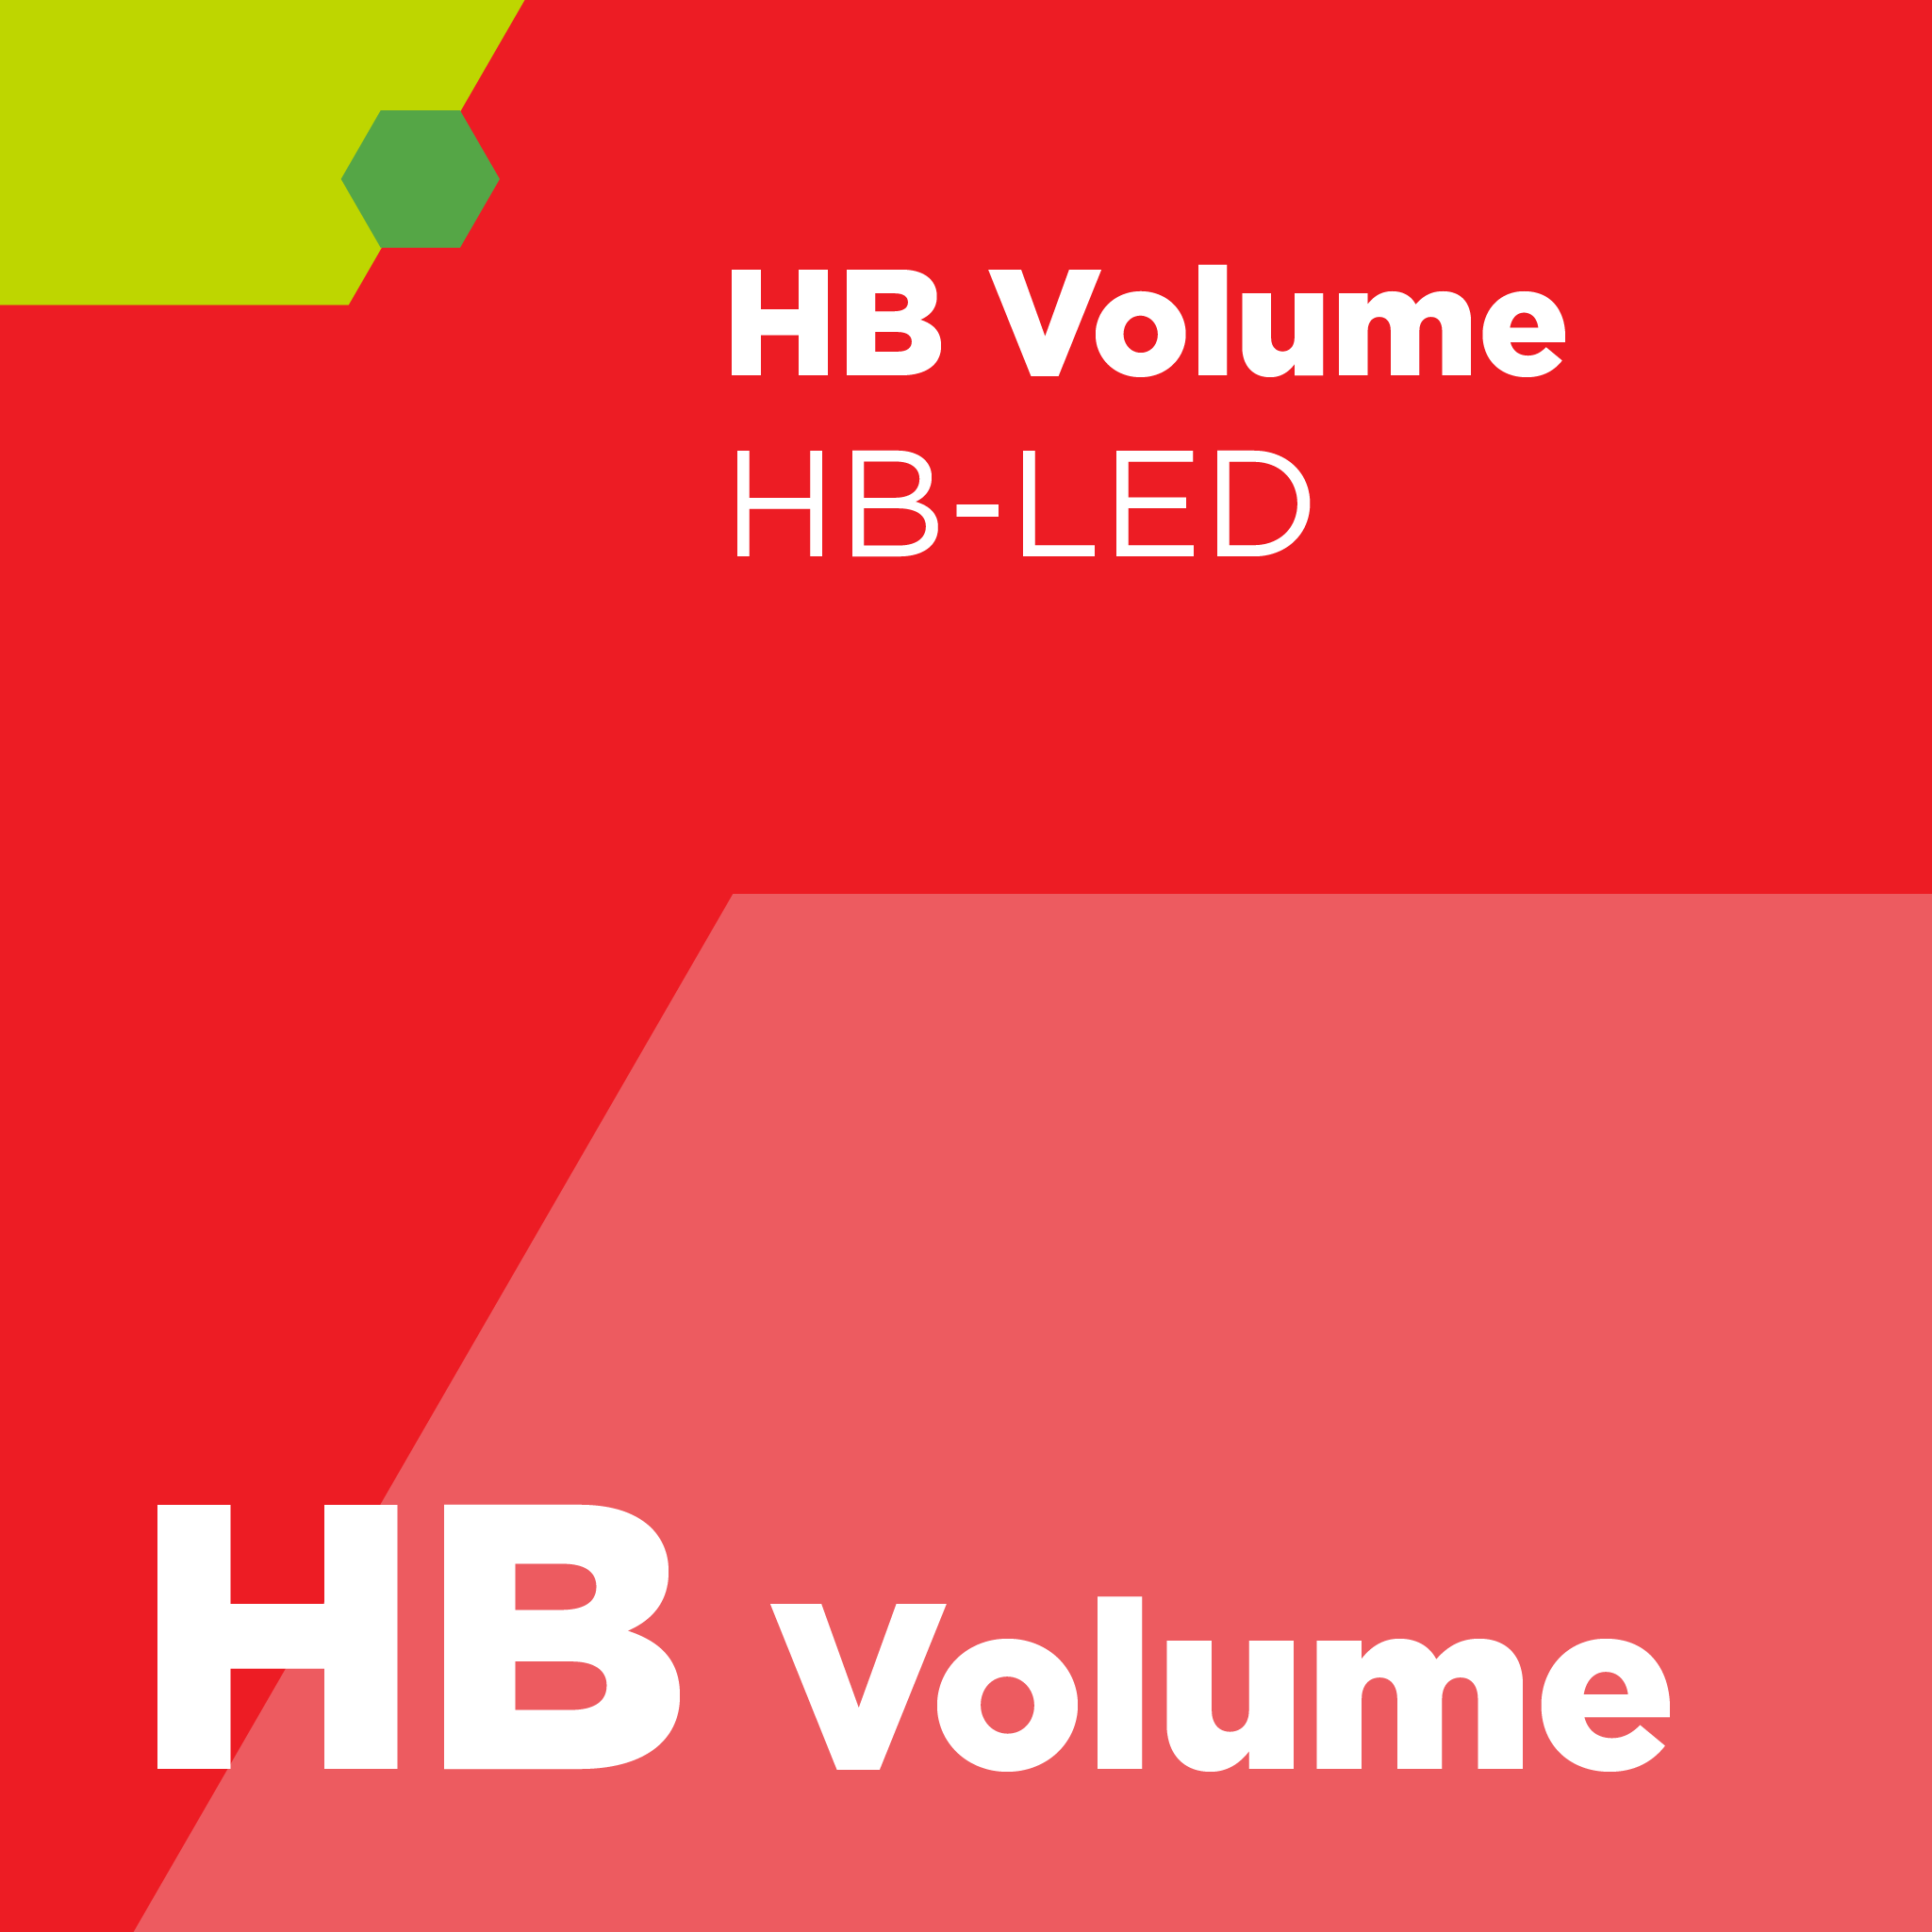 HB01100 - SEMI HB11 - Specification for Sapphire Single Crystal Ingot Intended for Use for Manufacturing HB-LED Wafers